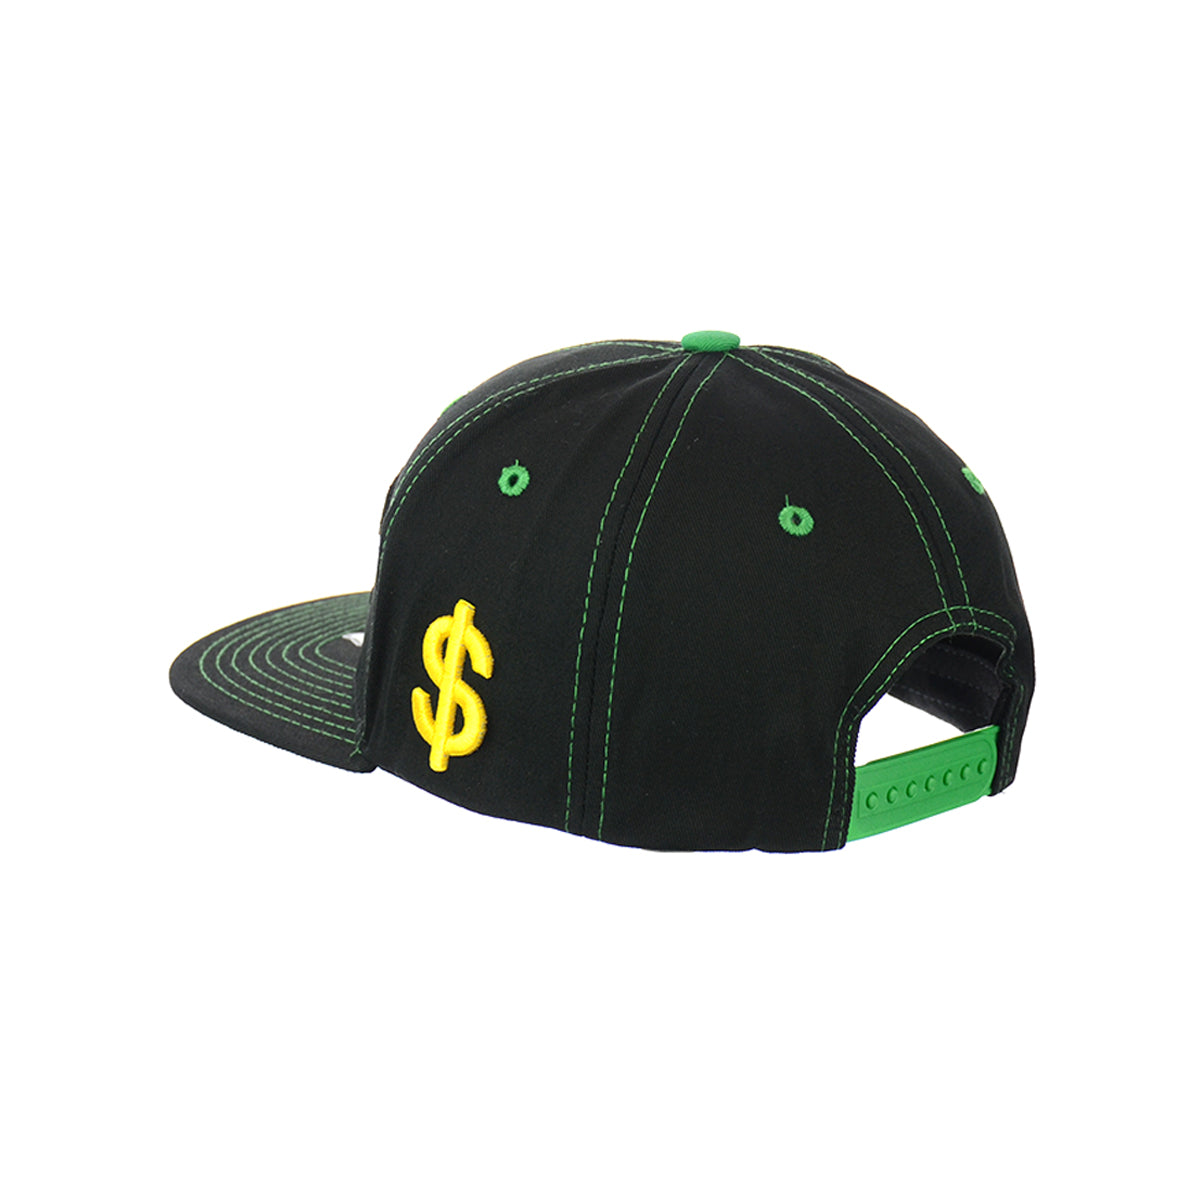 GOAT Embroidered Snapback Hat 100% Cotton